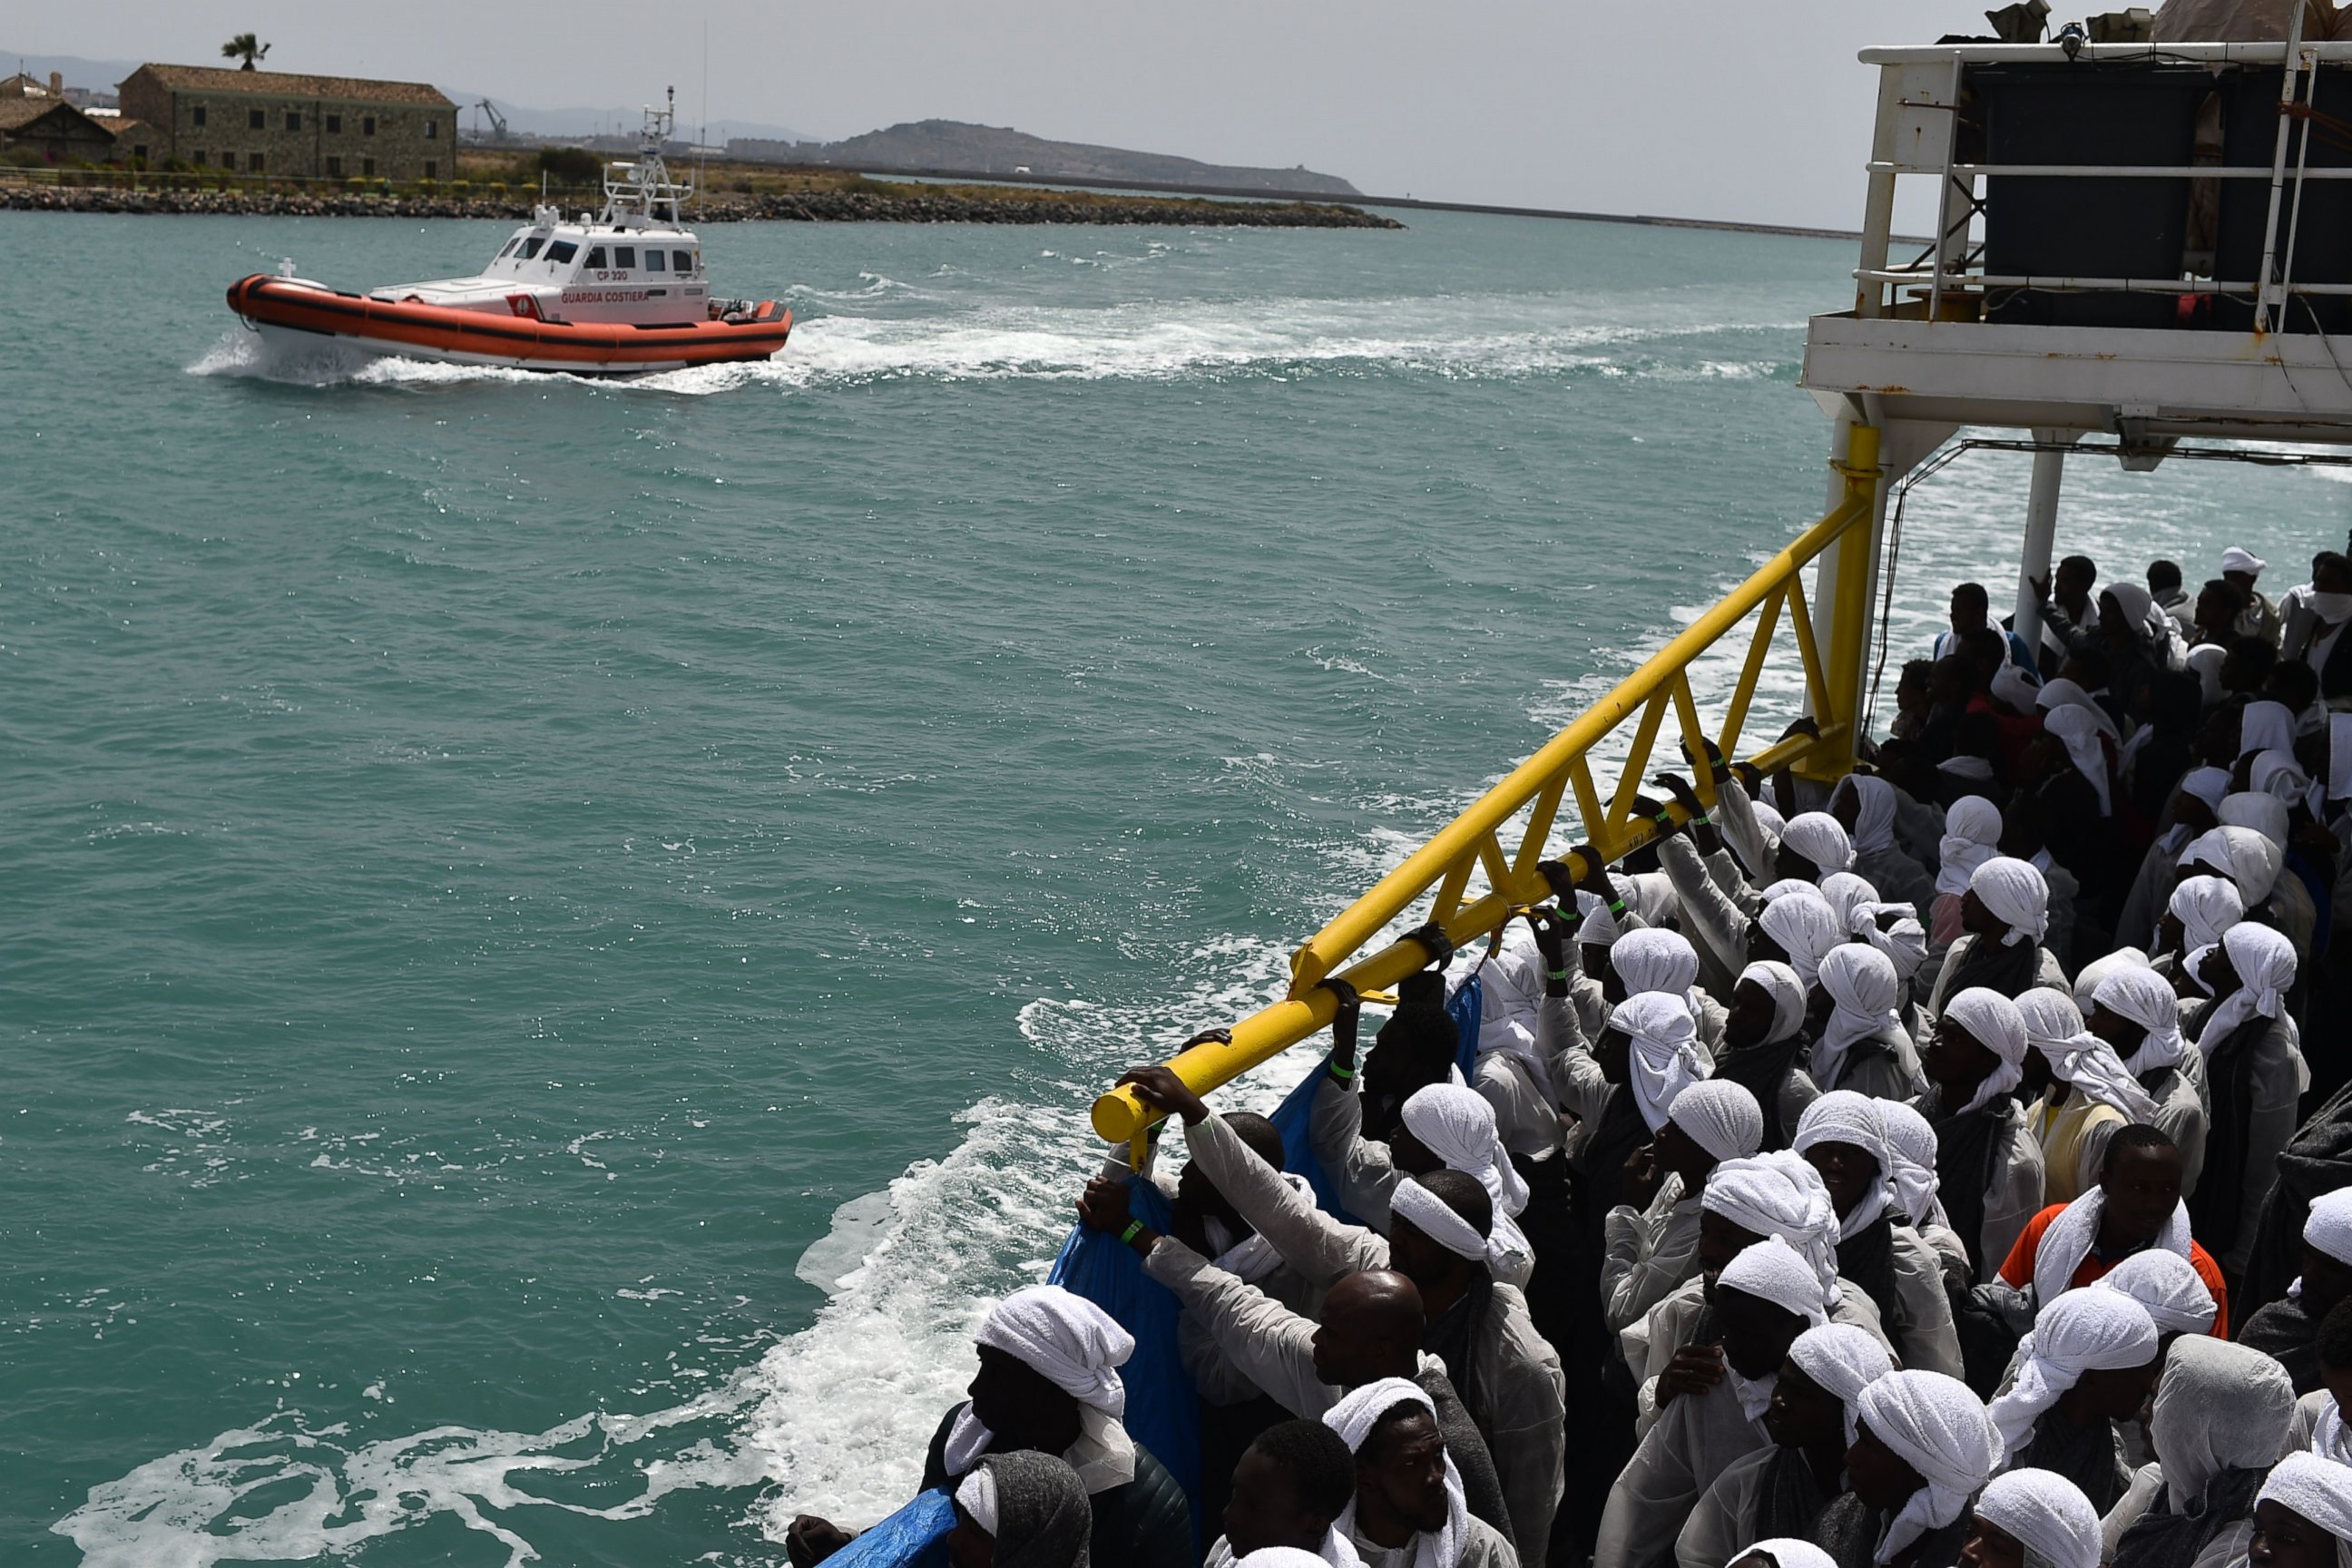 PHOTO: Migrants arrive in the port of Cagliari, Sardinia, aboard rescue ship "Aquarius", on May 26, 2016, two days after being rescued near the Libyan coasts. 